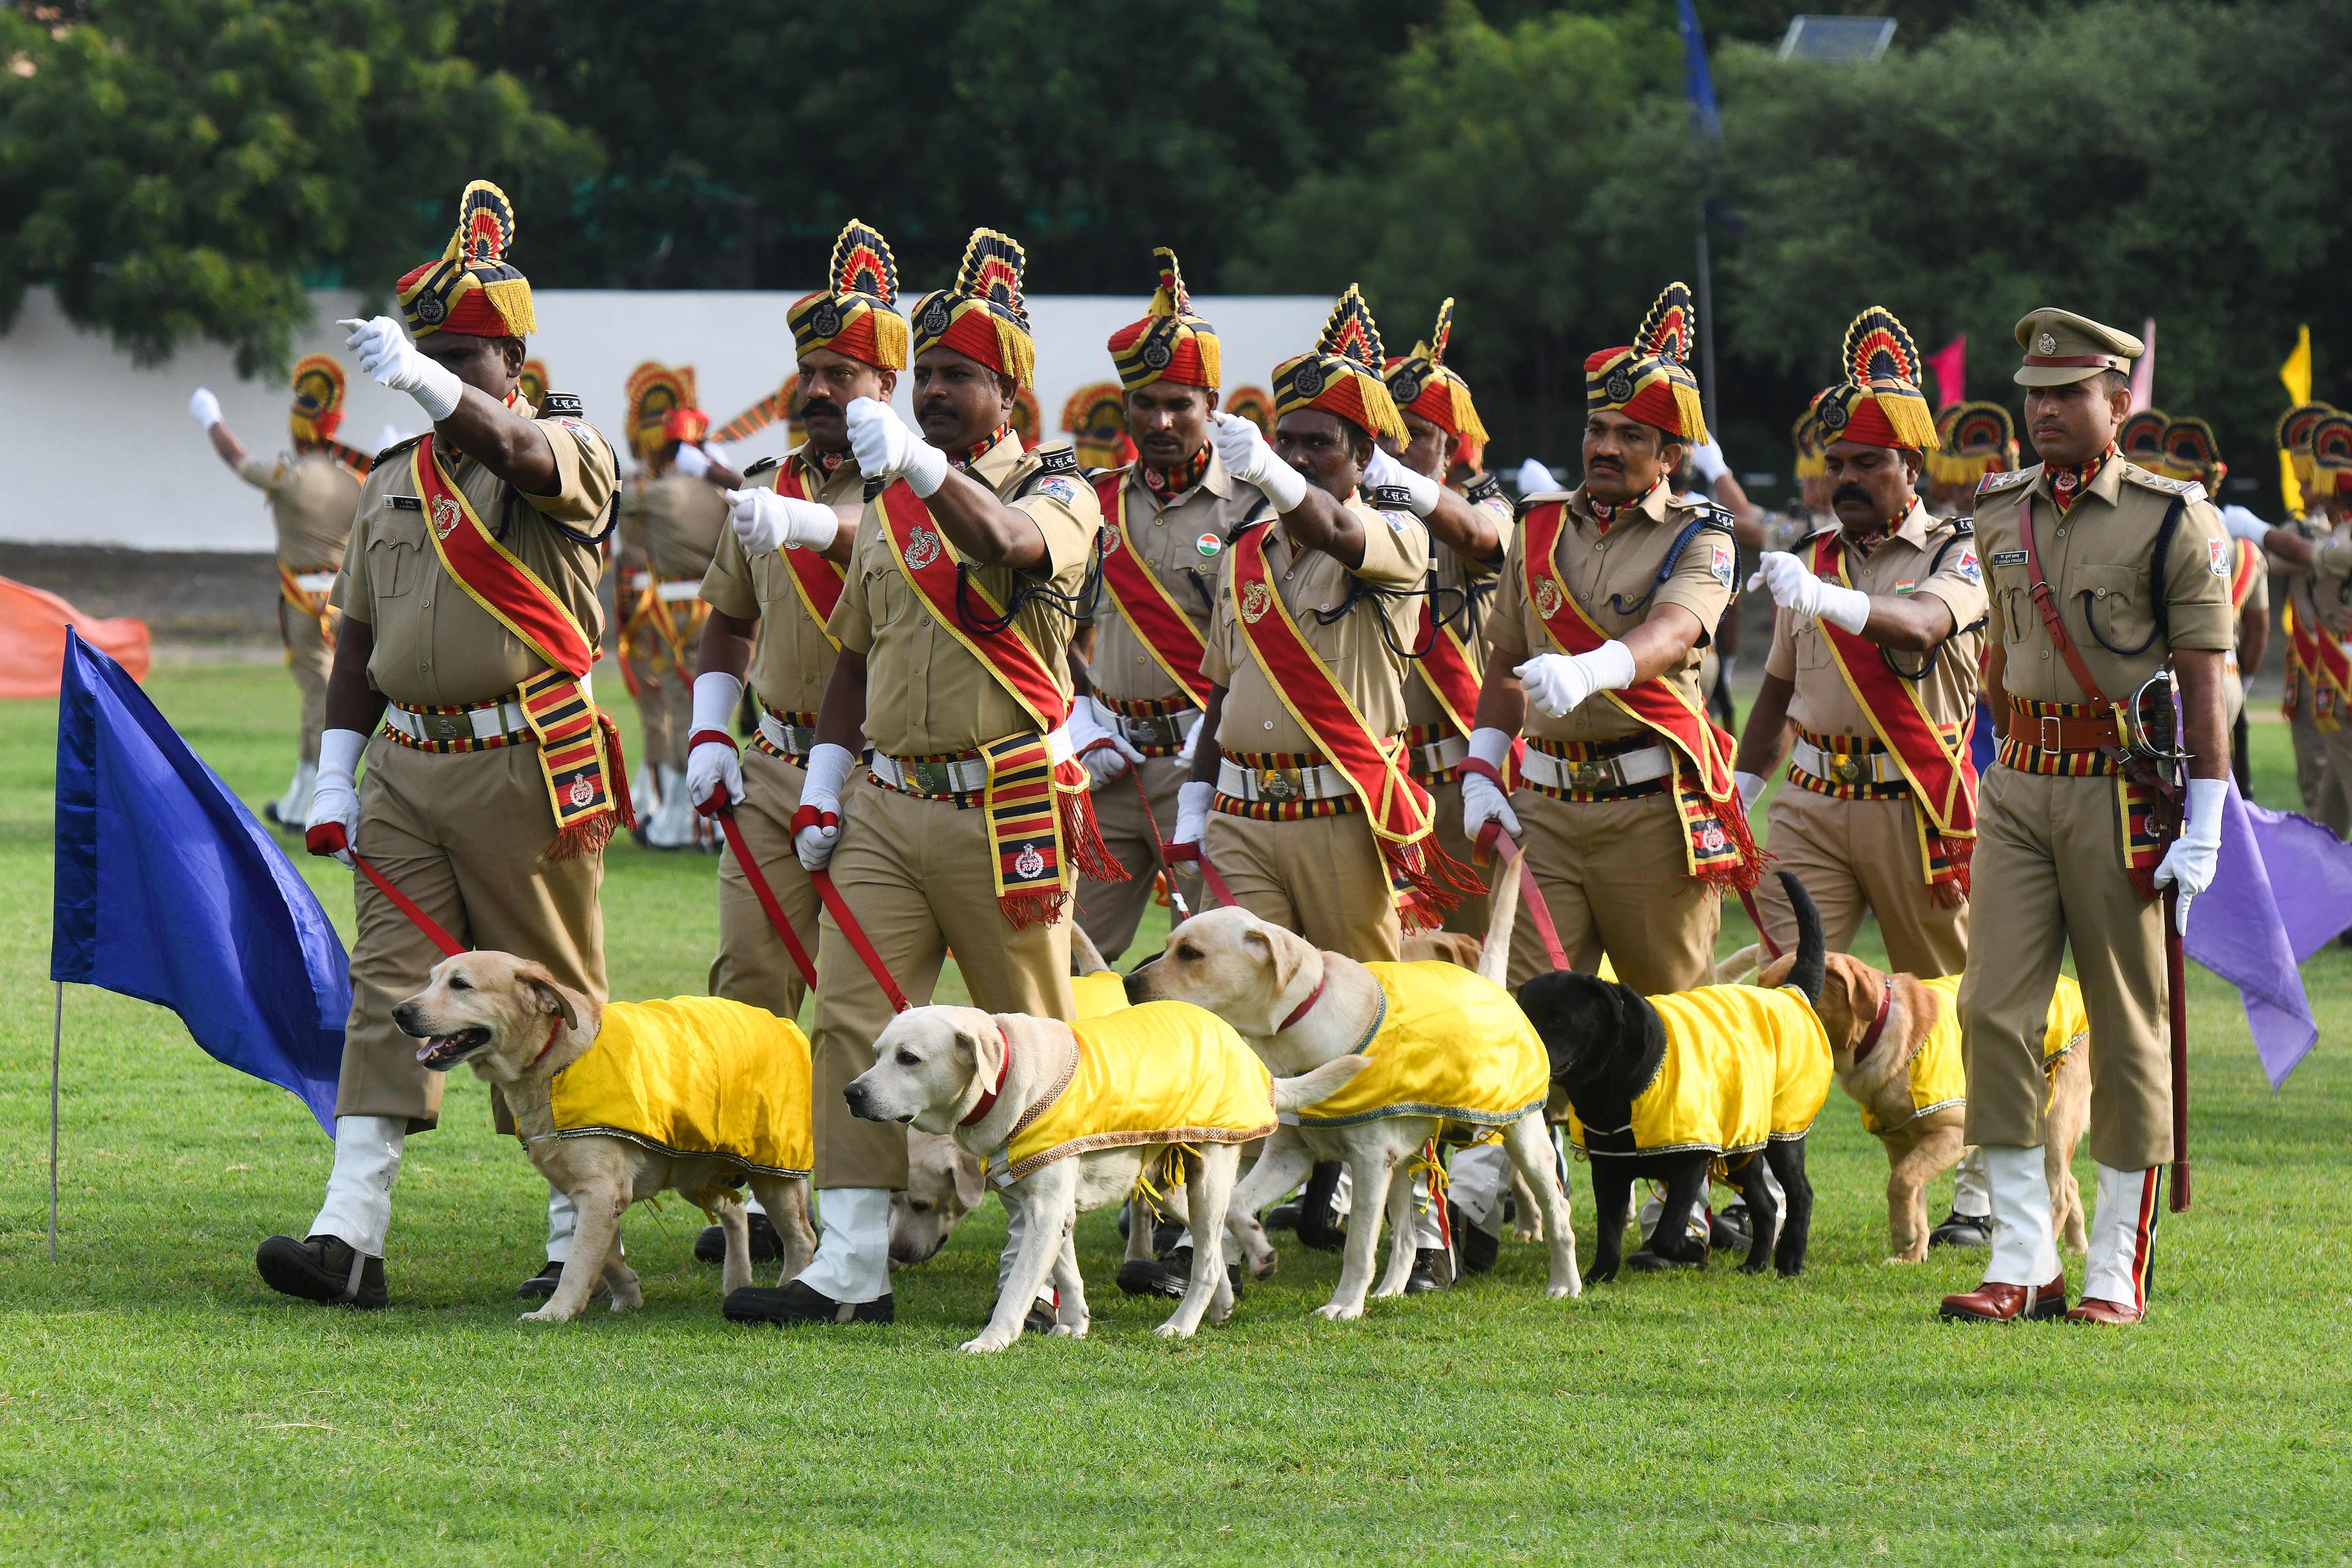 Indian Railway Protection Force (RPF) dog squad personnel march during a ceremony to celebrate country's 73rd Independence Day, which marks the of the end of British colonial rule, in Secunderabad on August 15, 2019. Pic/AFP